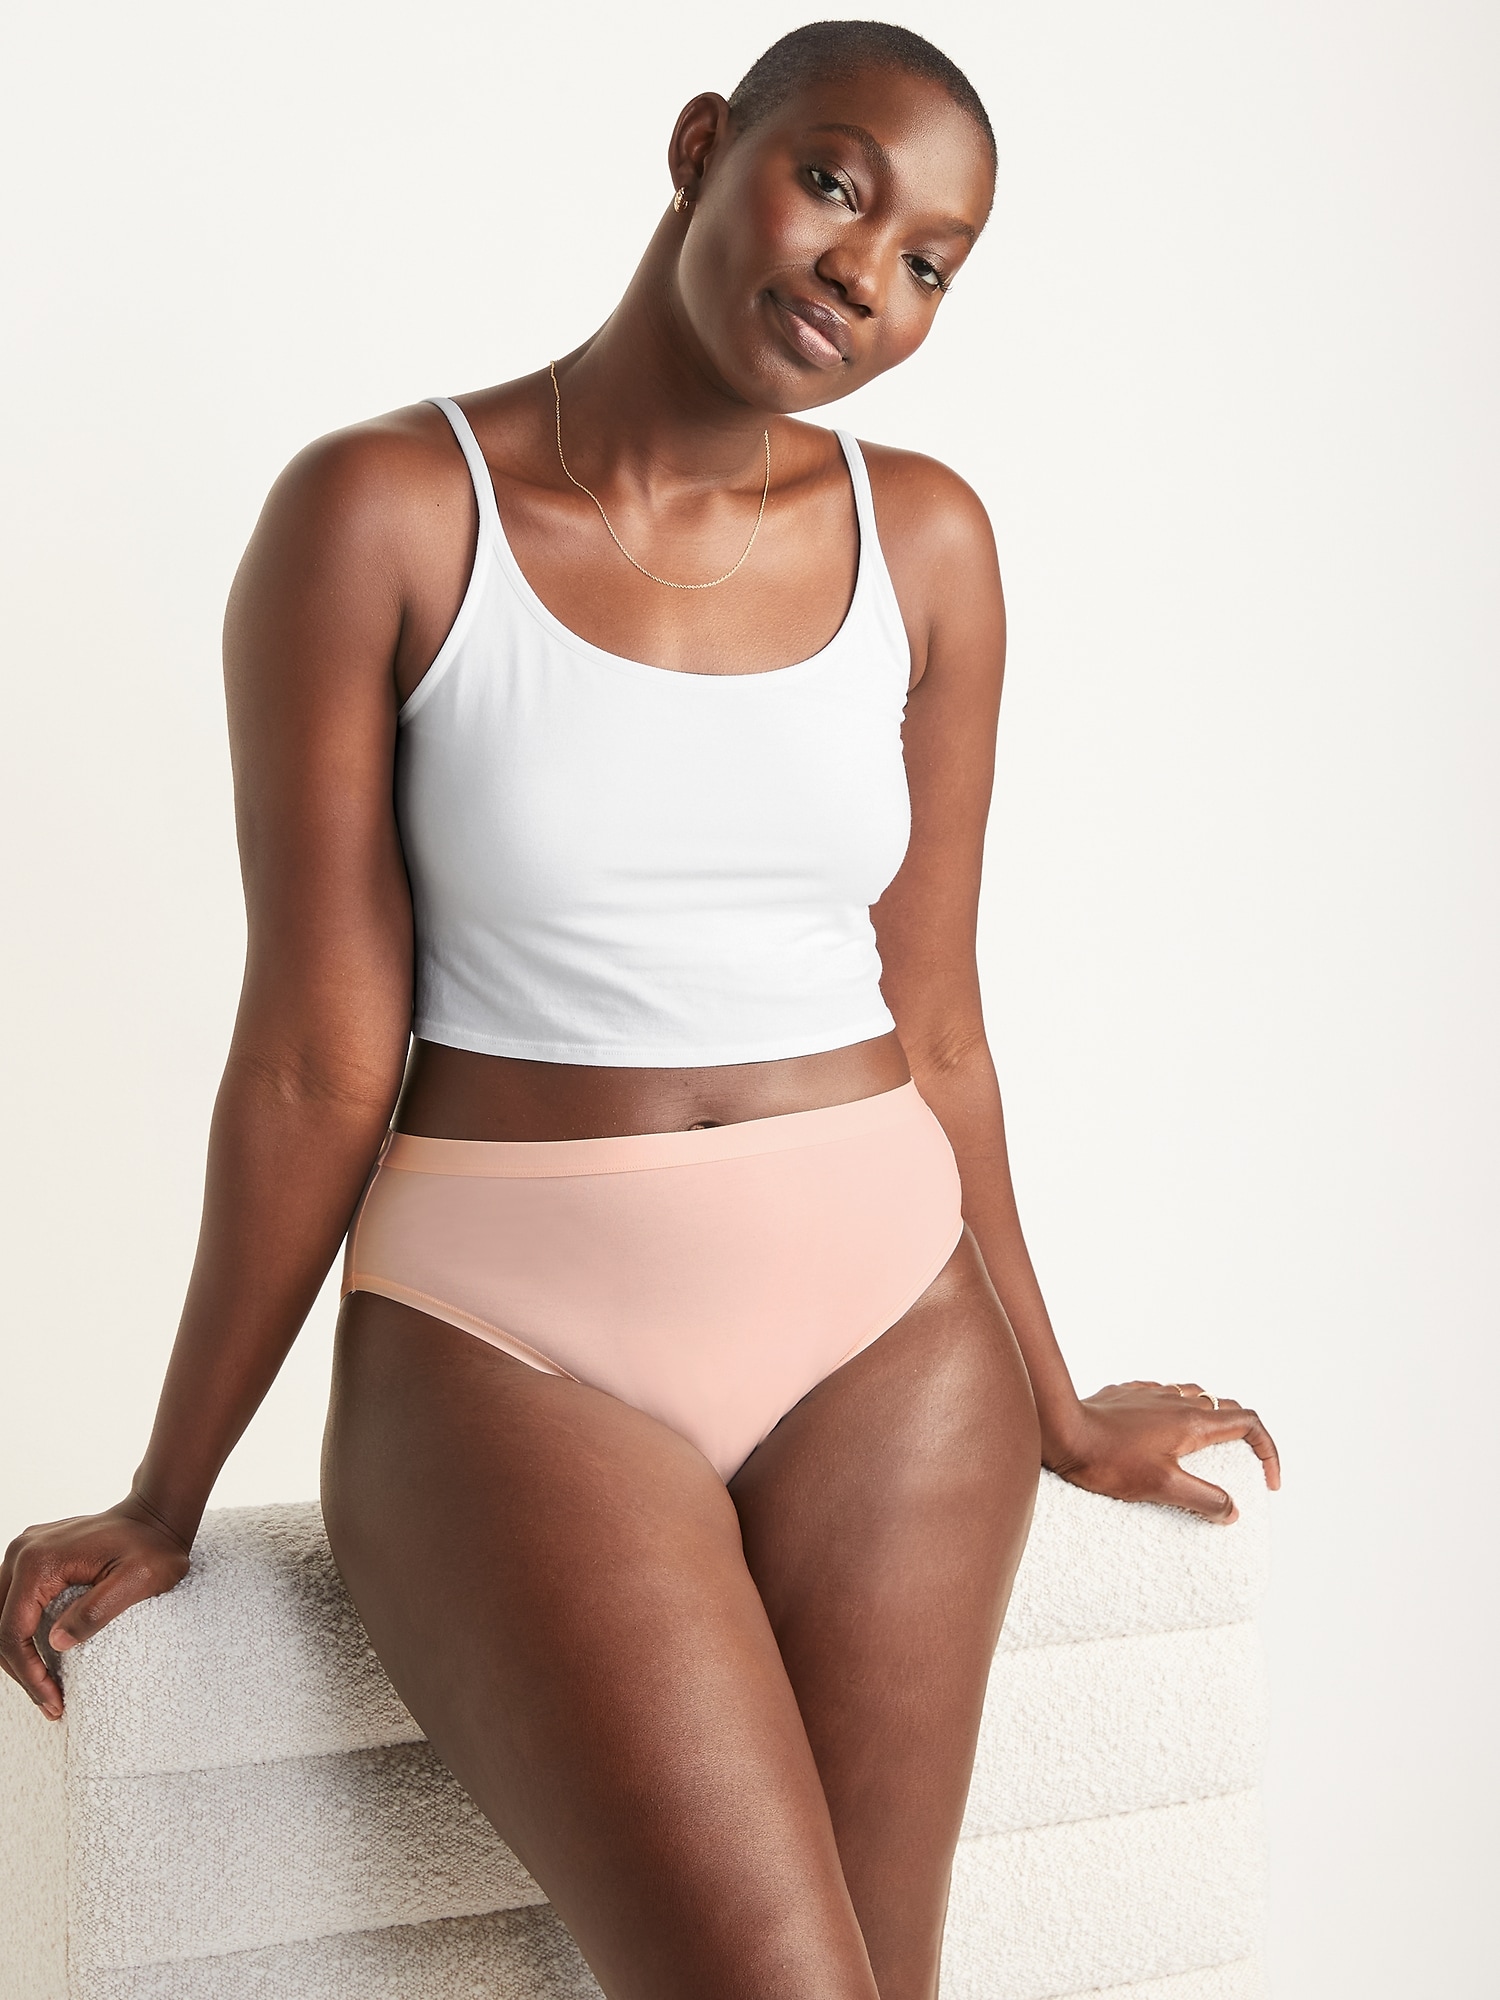 The Everyday Bikini in Blush (Side-Opening Underwear with Magnets)